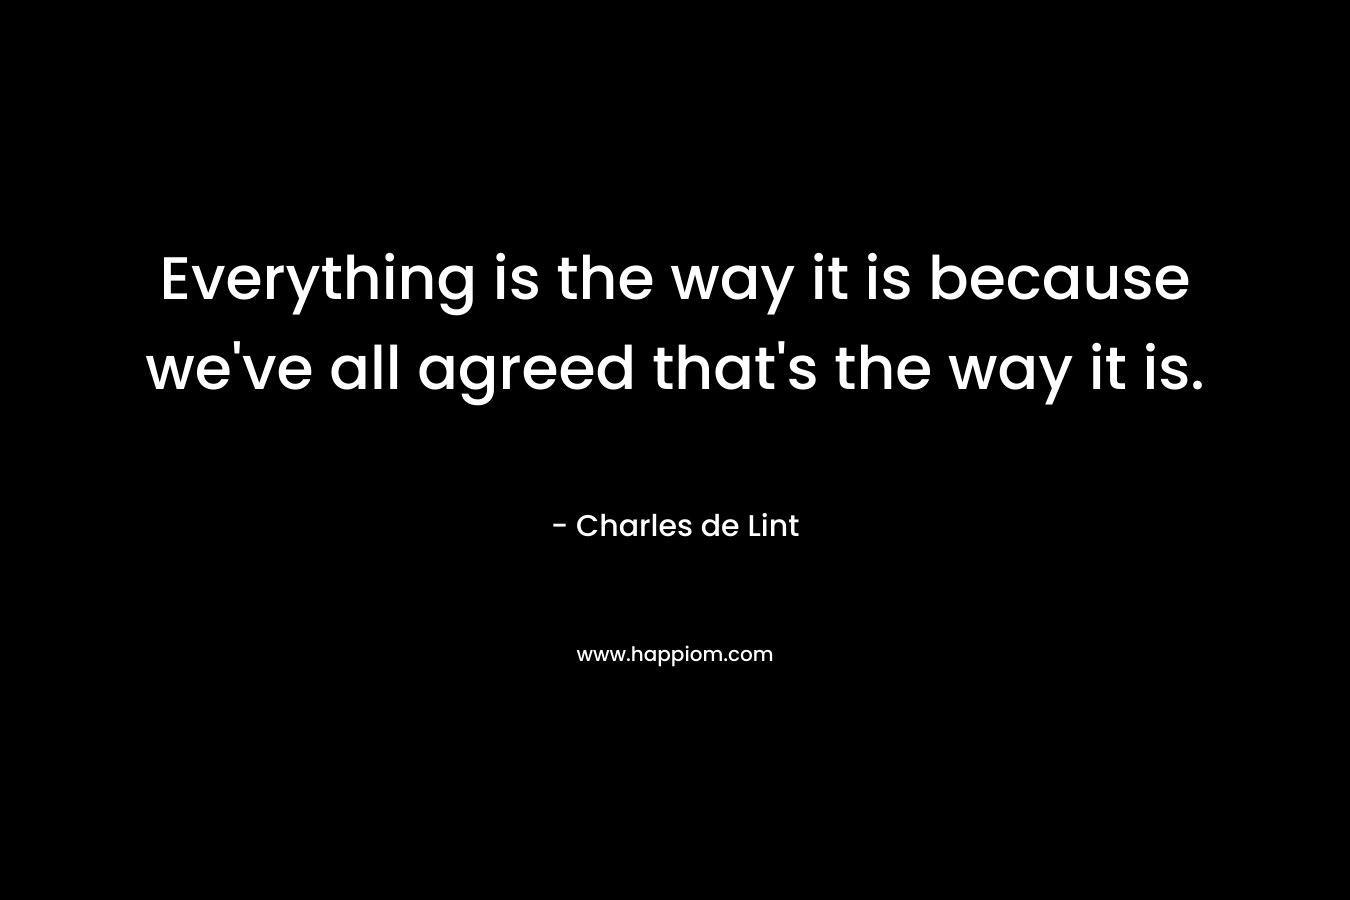 Everything is the way it is because we’ve all agreed that’s the way it is. – Charles de Lint